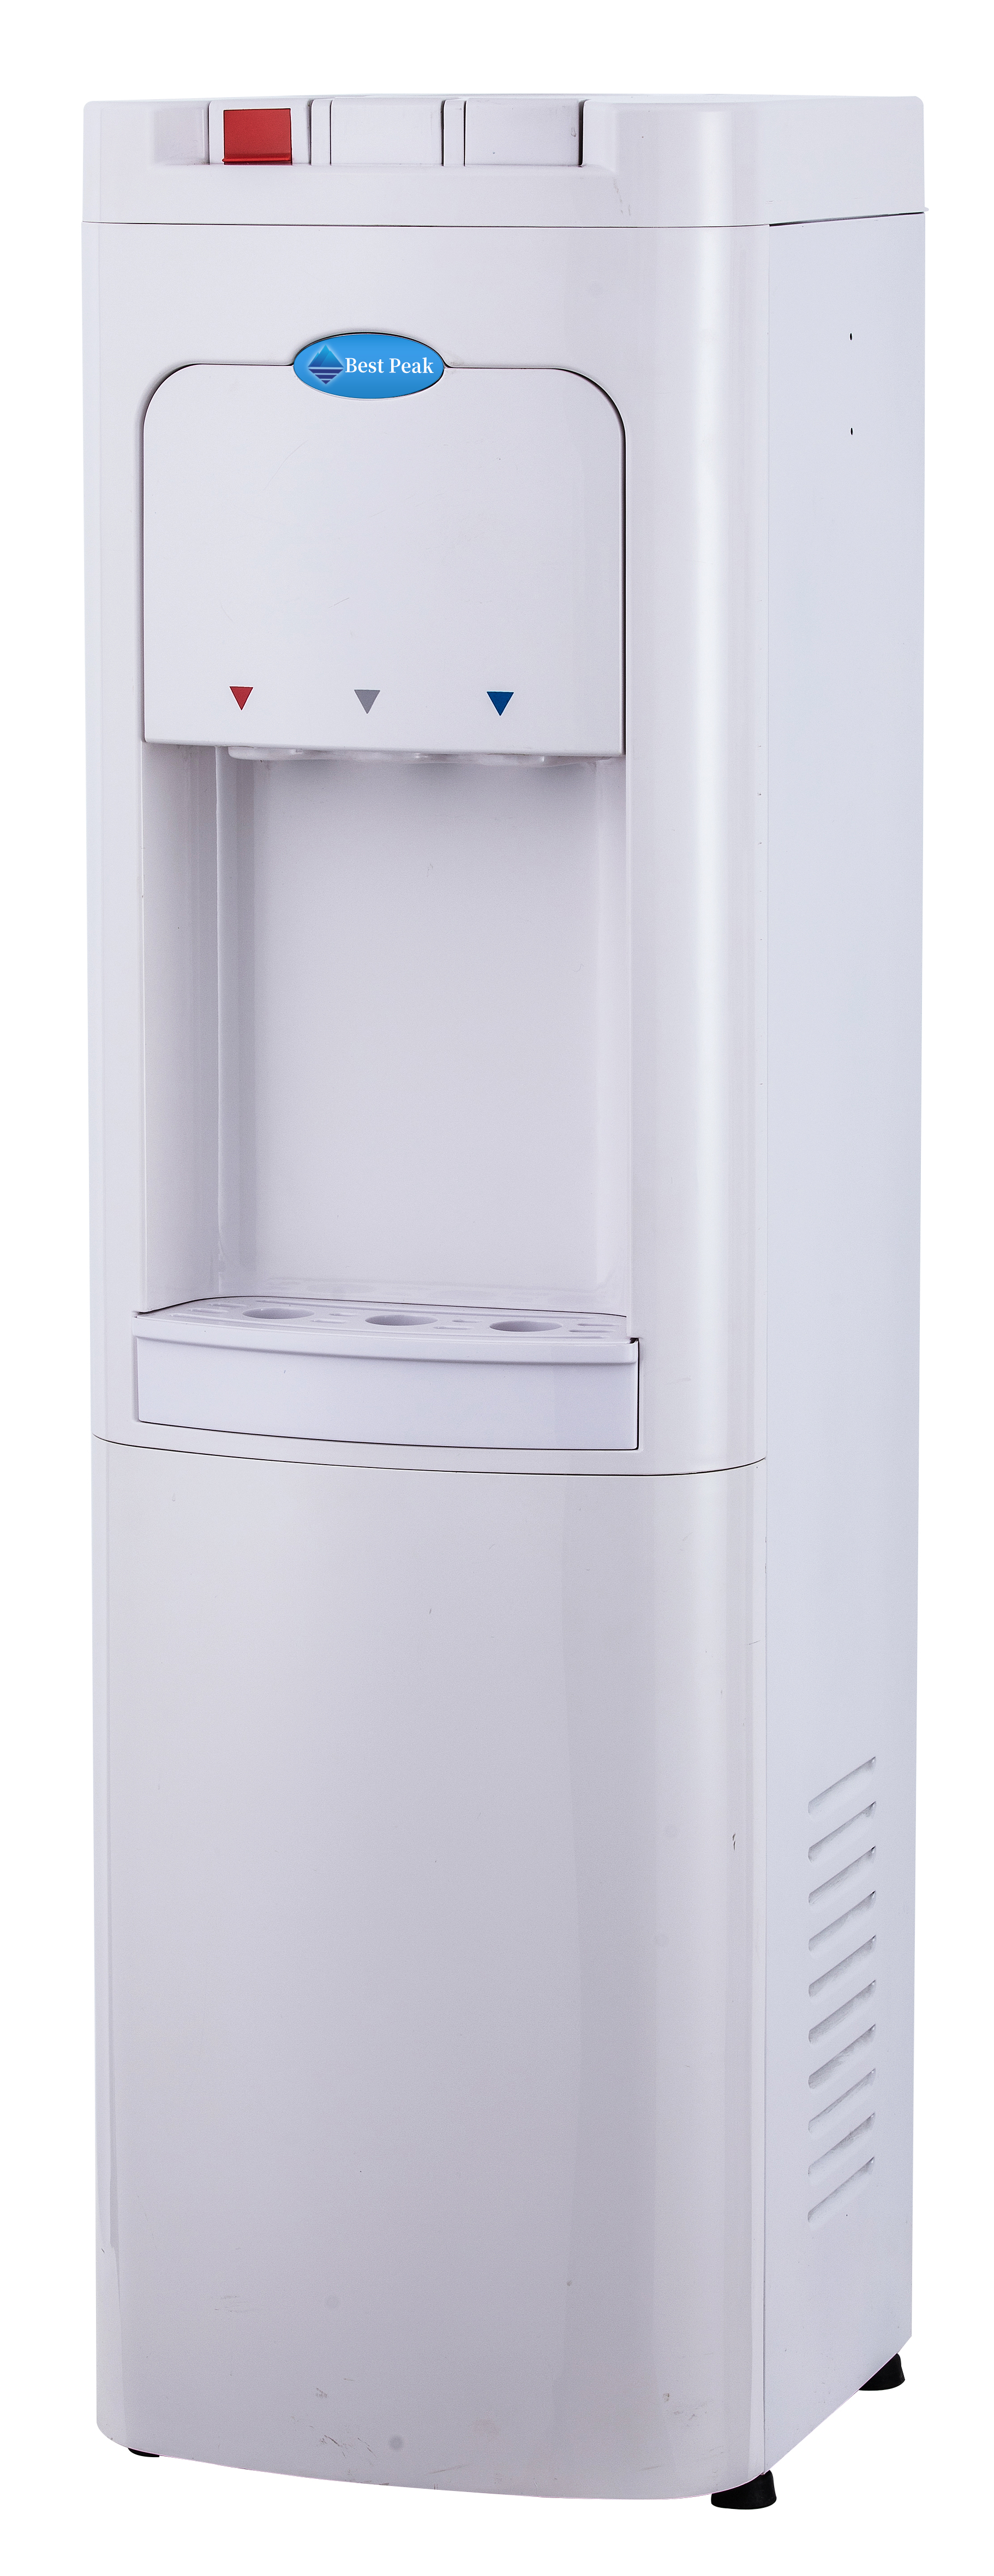 Whirlpool Commercial Water Dispenser Water Cooler with Ice Chilled Water Cooling Technology, White - image 1 of 10